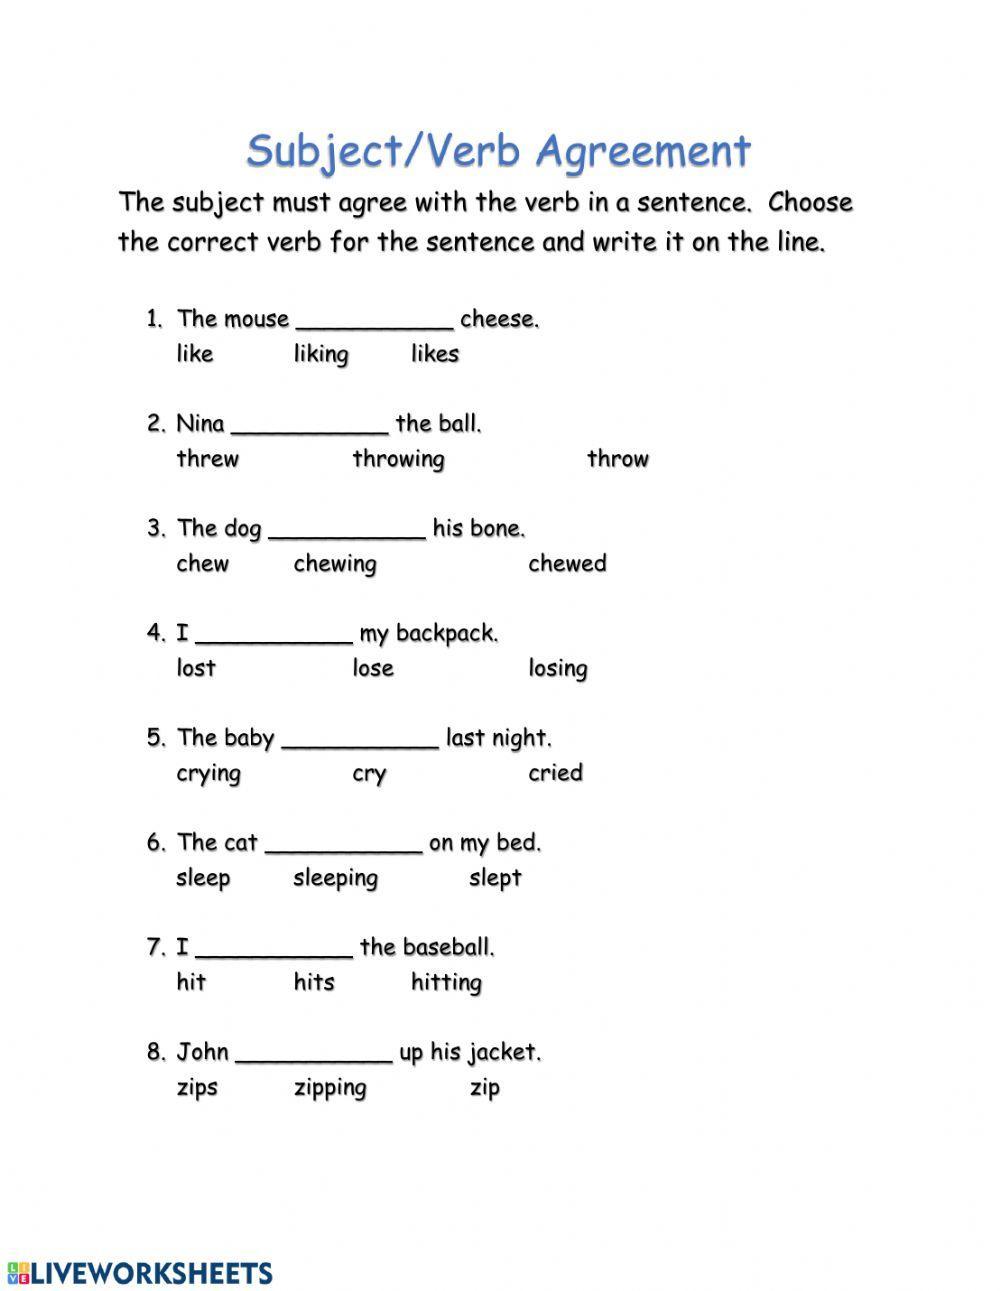 Subject-Verb Agreement - fill in the blank